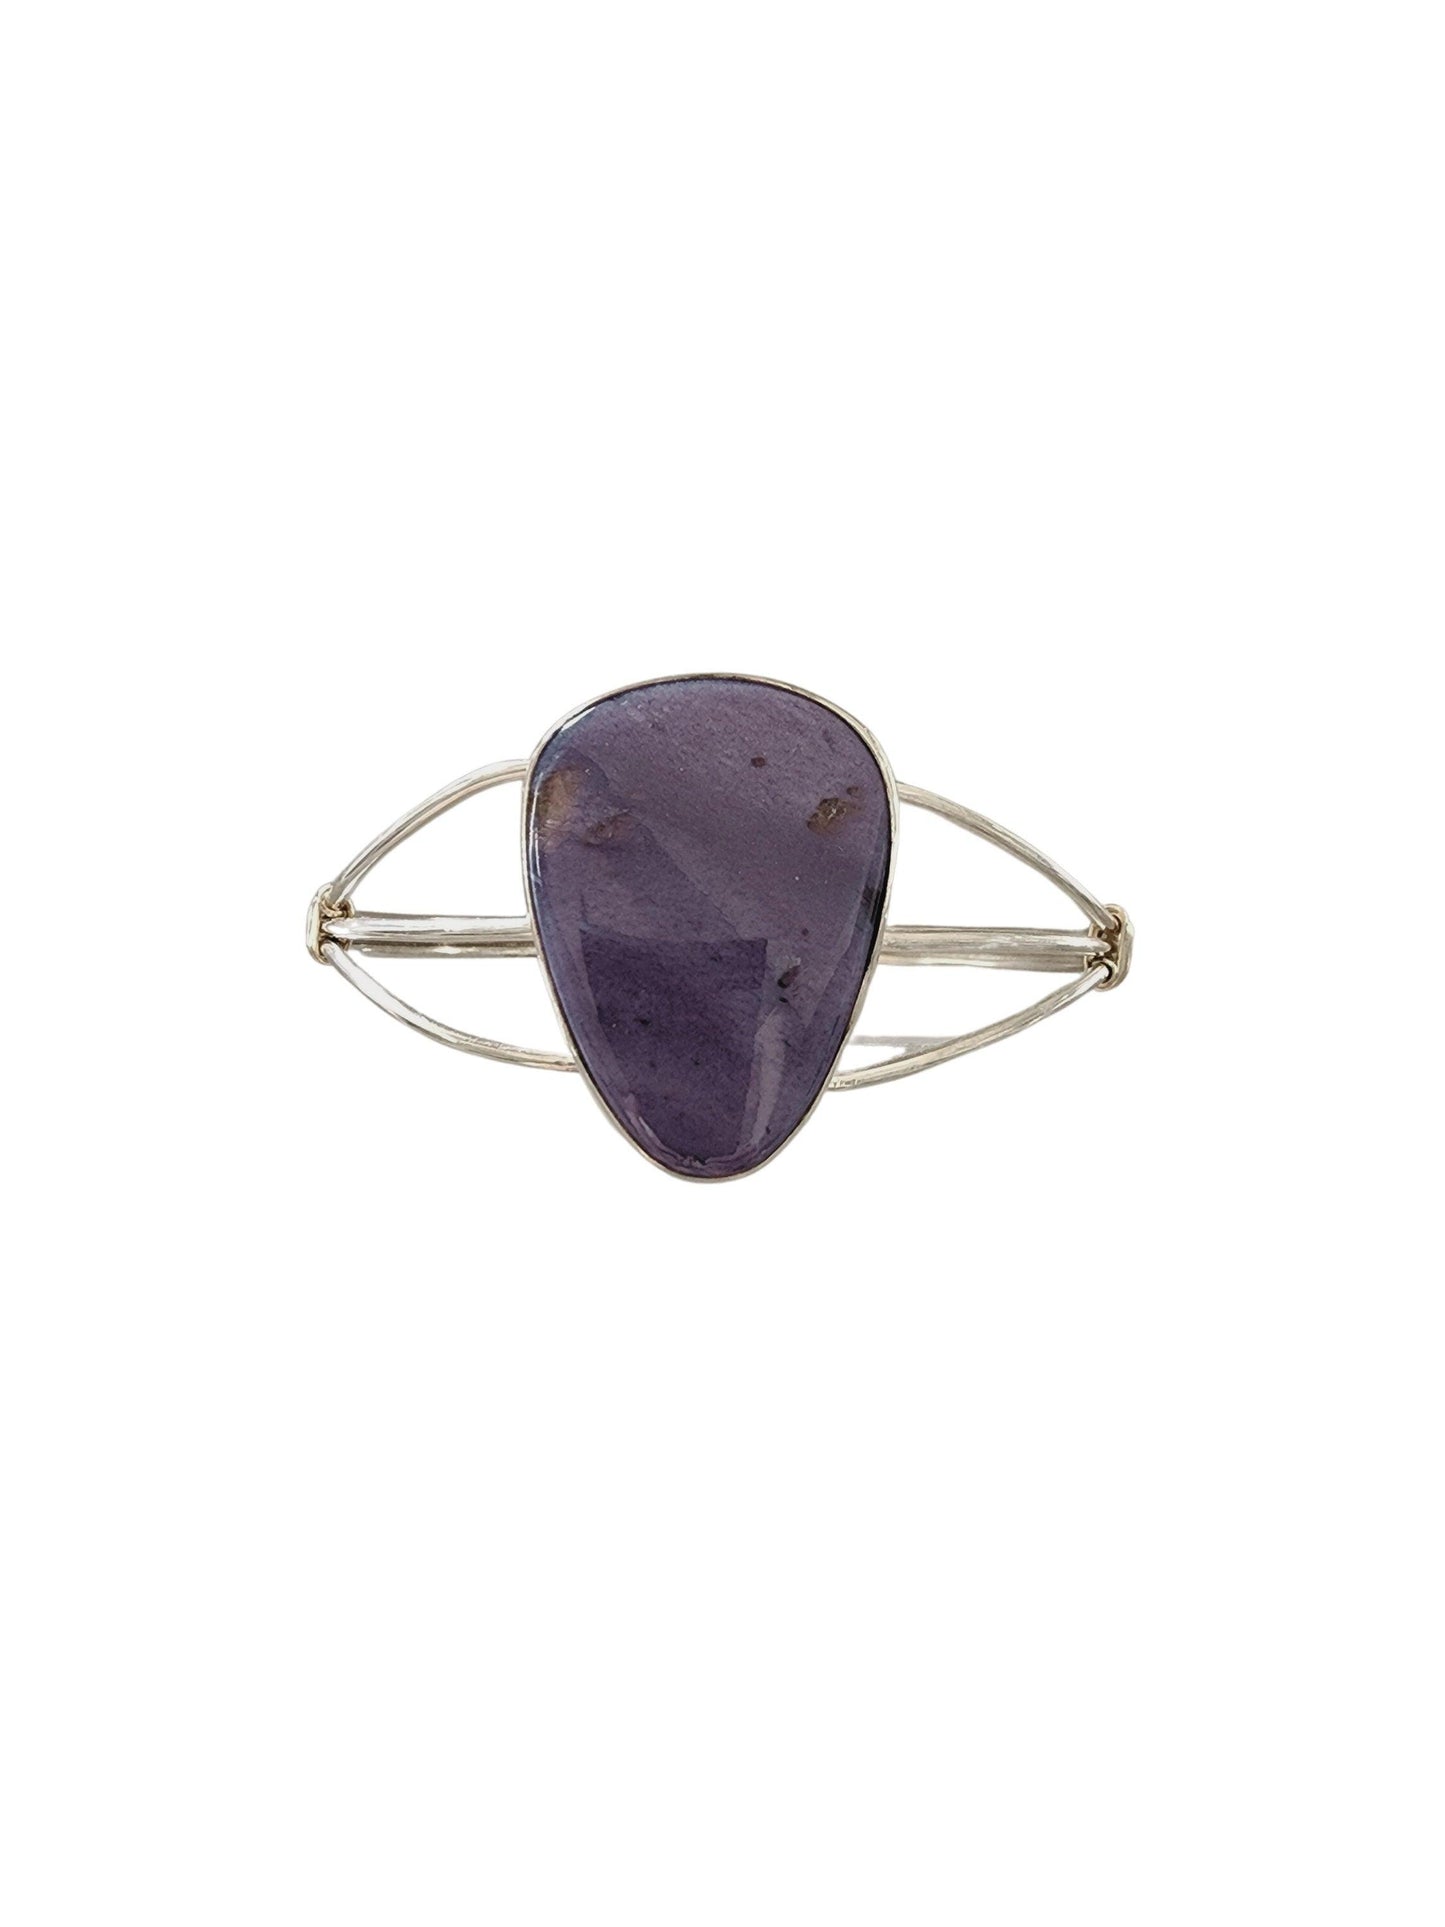 Womans Handmade Charoite and Sterling Silver Cuff Bracelet